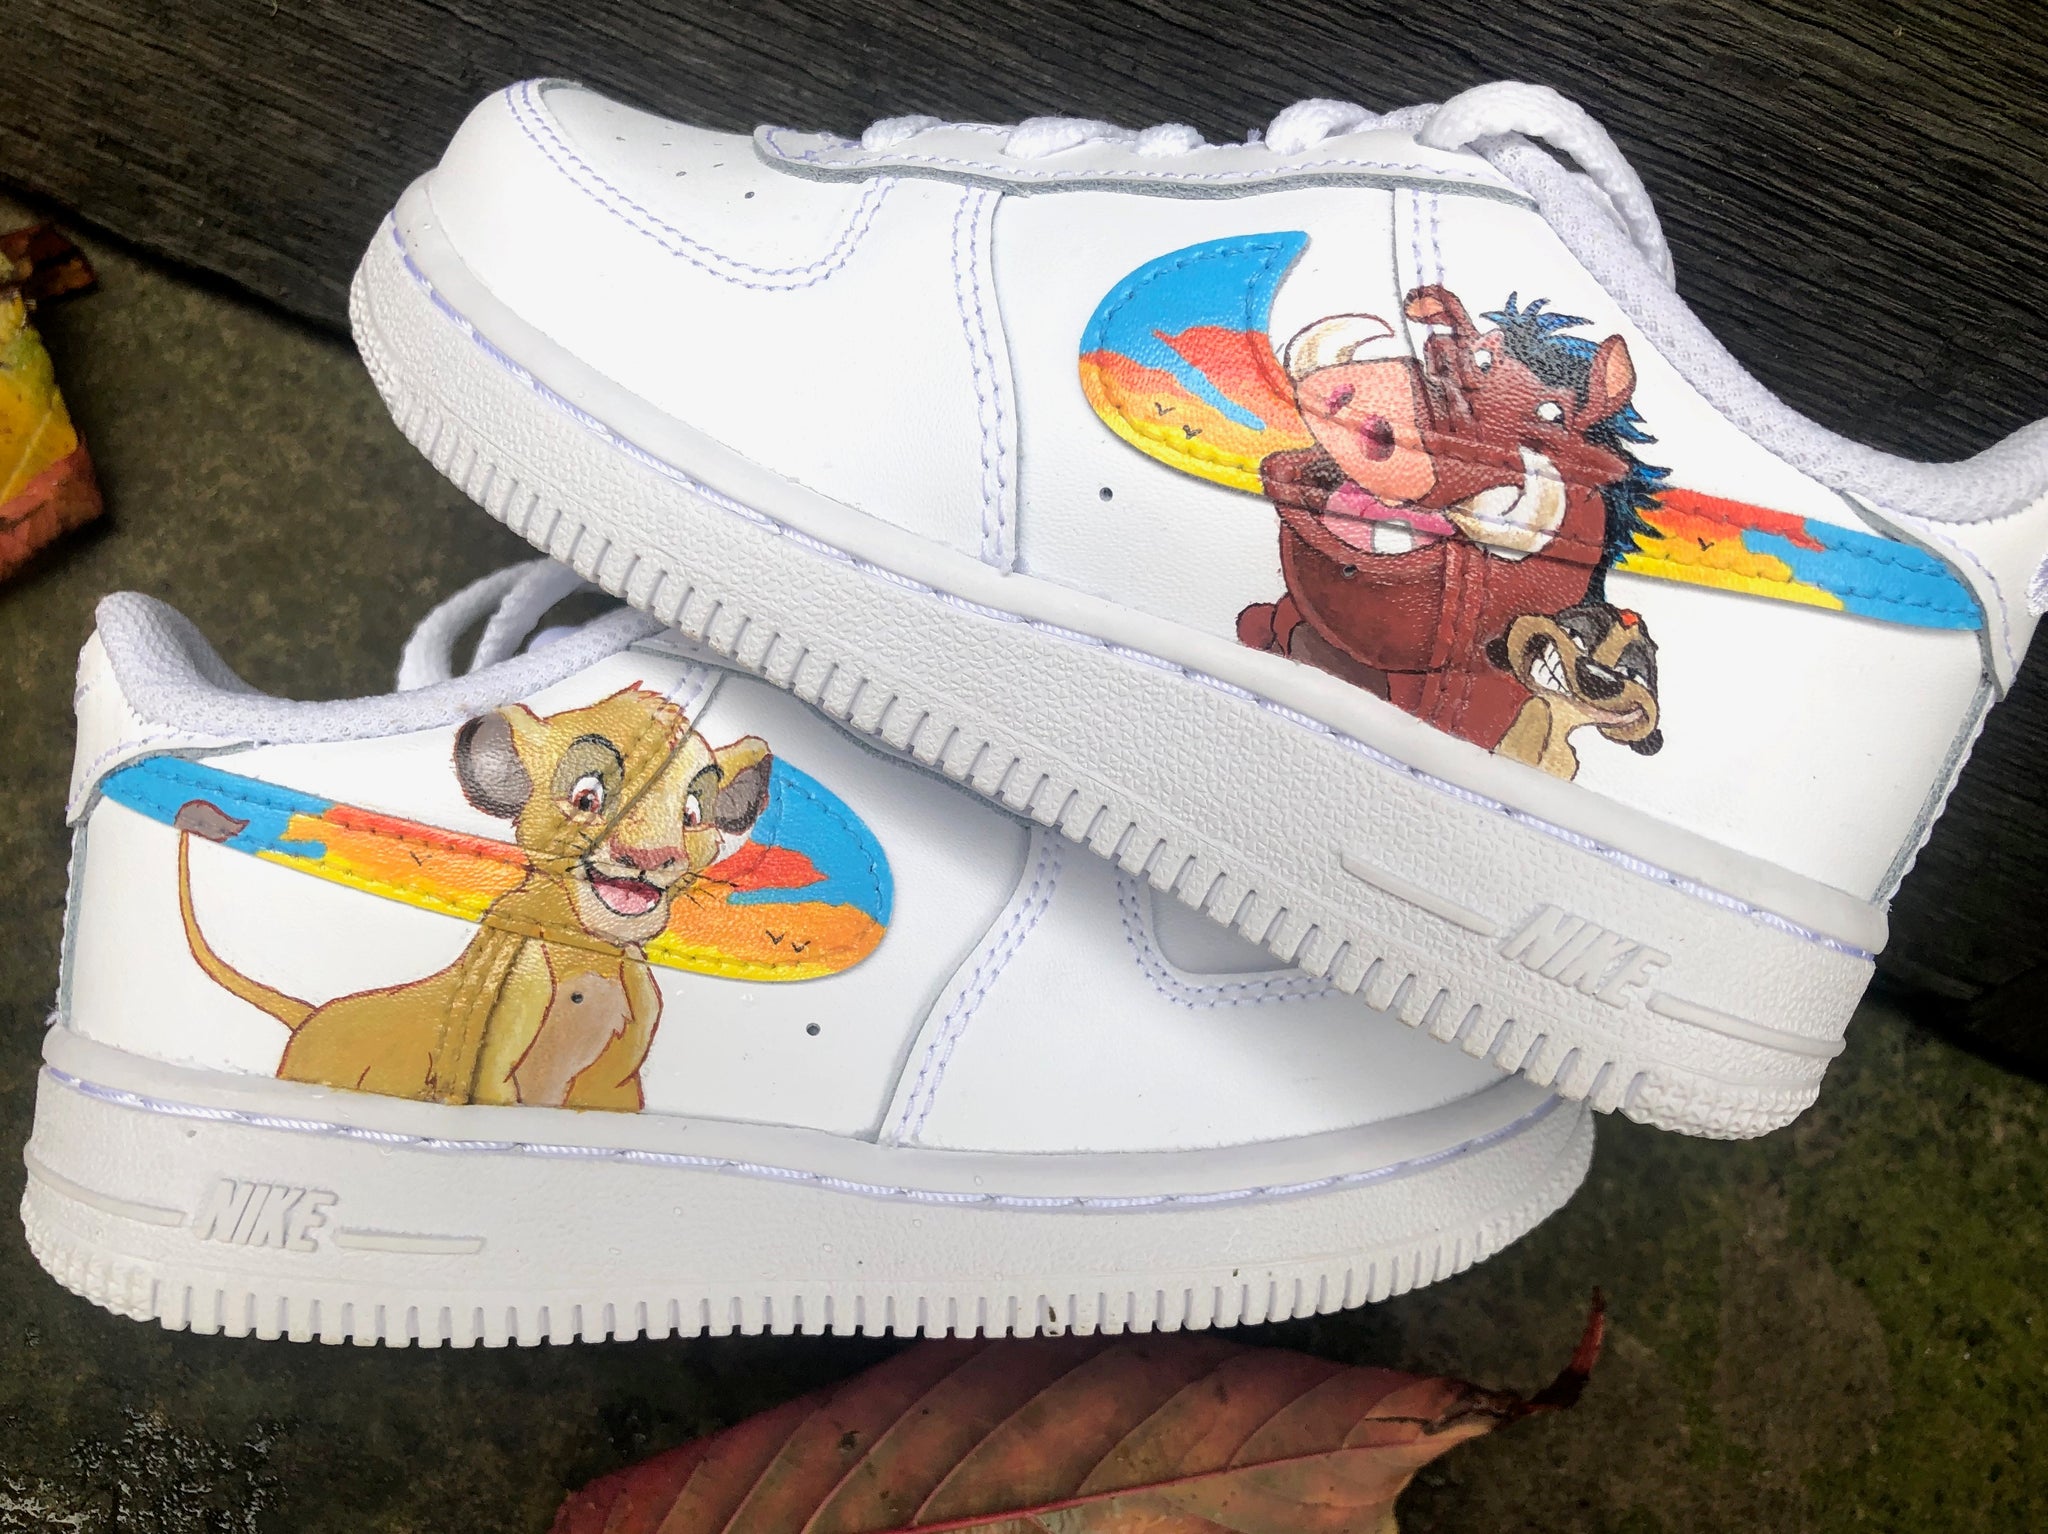 The Lion King inspired Nike Air Force 1 